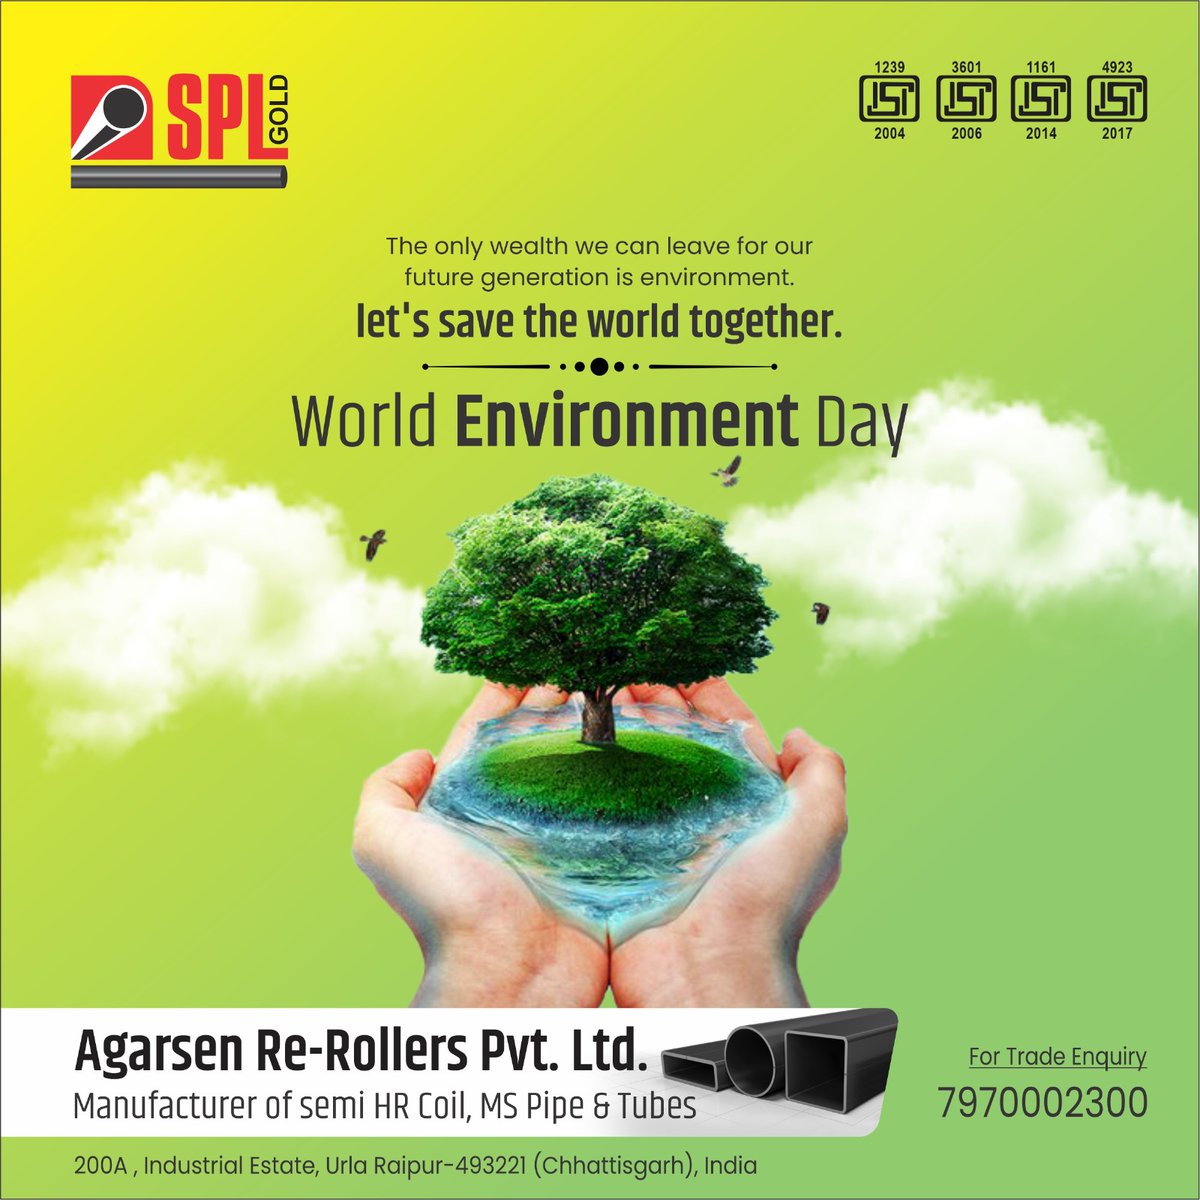 The only wealth we can leave for our future generation is environment. let's save the world together. Happy World Environment Day
#WorldEnvironmentDay2023 #EnvironmentalEducationWeek #SaveEnvironmentForFuture #EnvironmentalImpact #environmentallyconscious #EnvironmentDay23